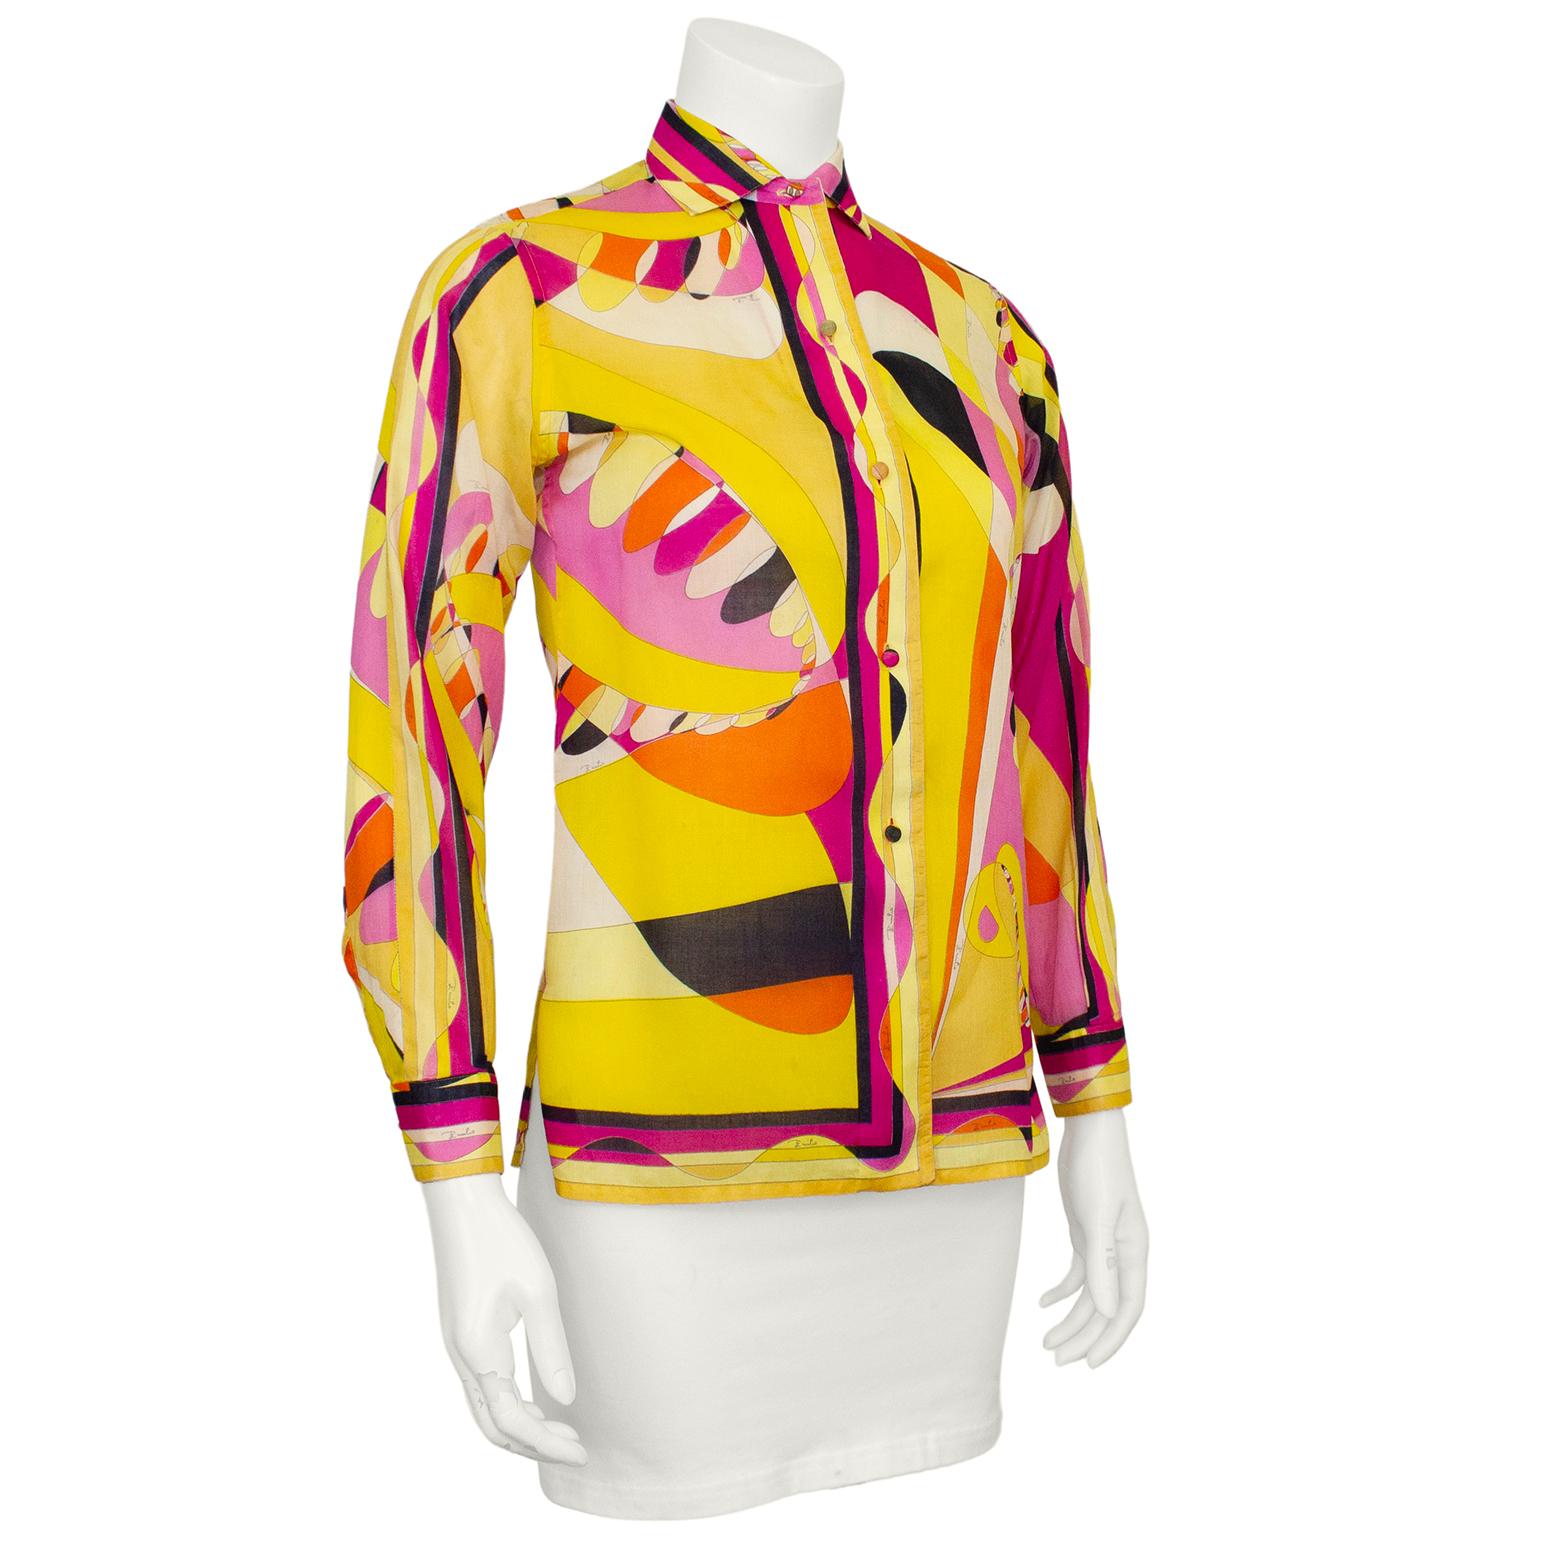 Fabulous cotton Emilio Pucci printed shirt from the 1960s. Made exclusively for Saks Fifth Avenue, the shirt features a black, pink, orange and yellow design. In excellent condition with covered buttons down the front and a stiff collar and placket.